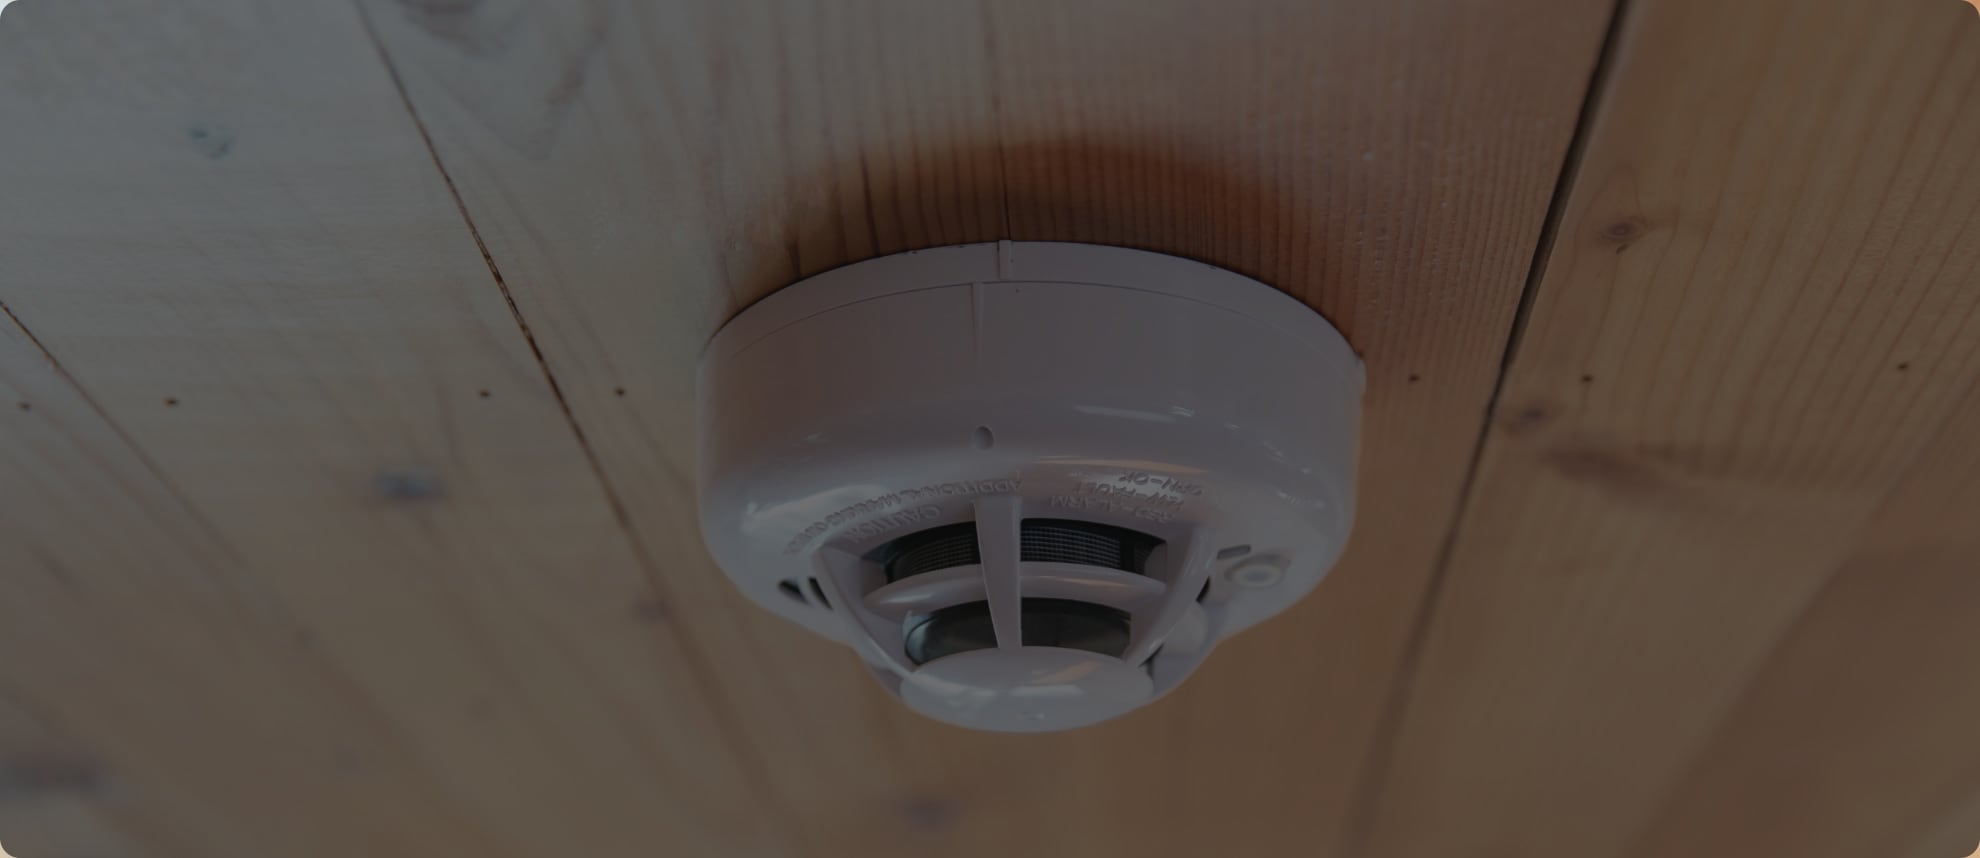 Vivint Monitored Smoke Alarm in New Orleans